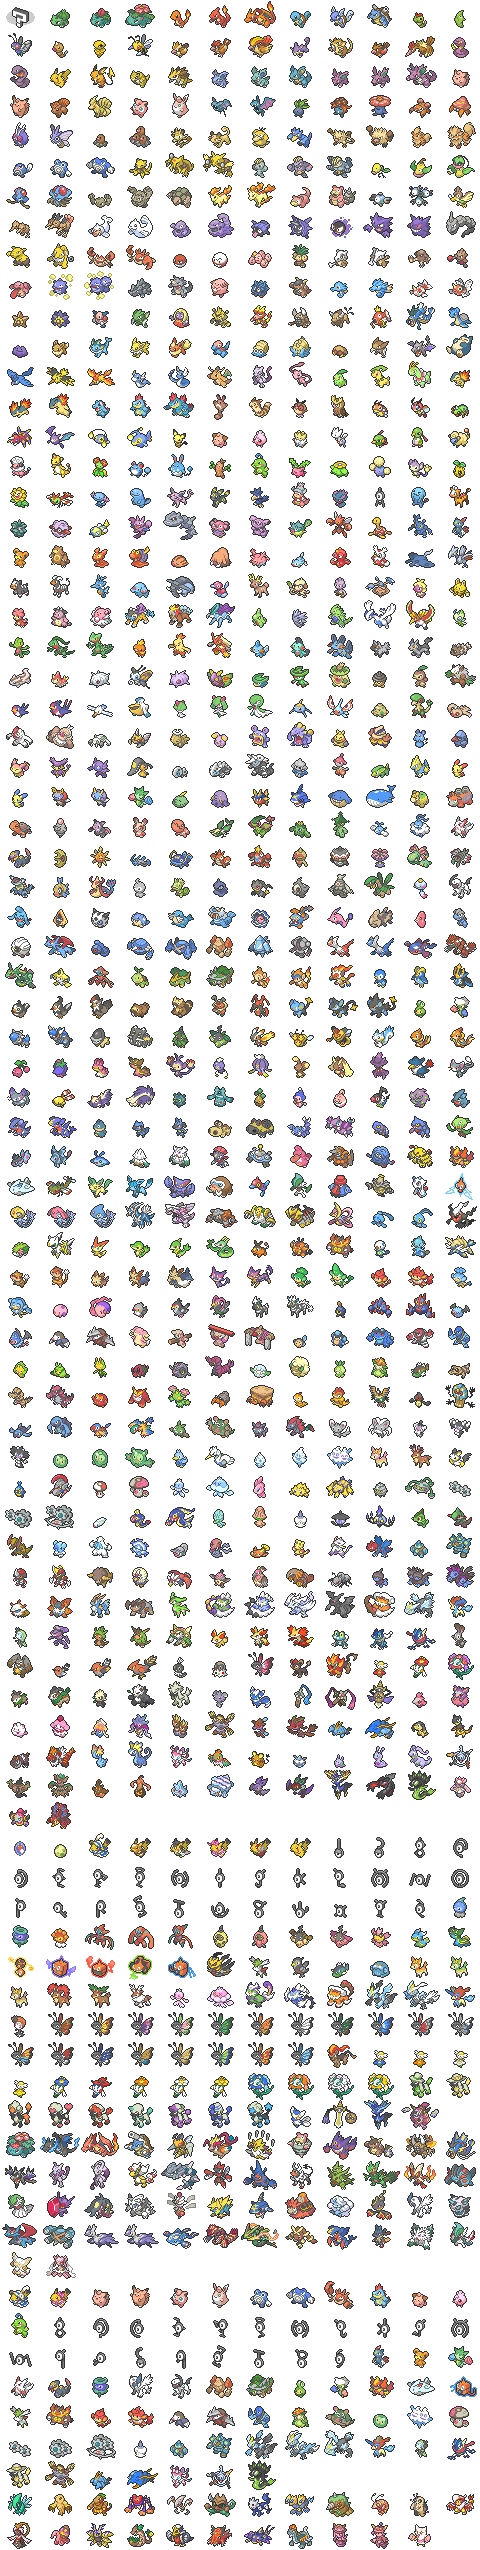 The Spriters Resource - Full Sheet View - Pokémon Sun / Moon - Alola Dex  Previews (4th Generation, Normal)